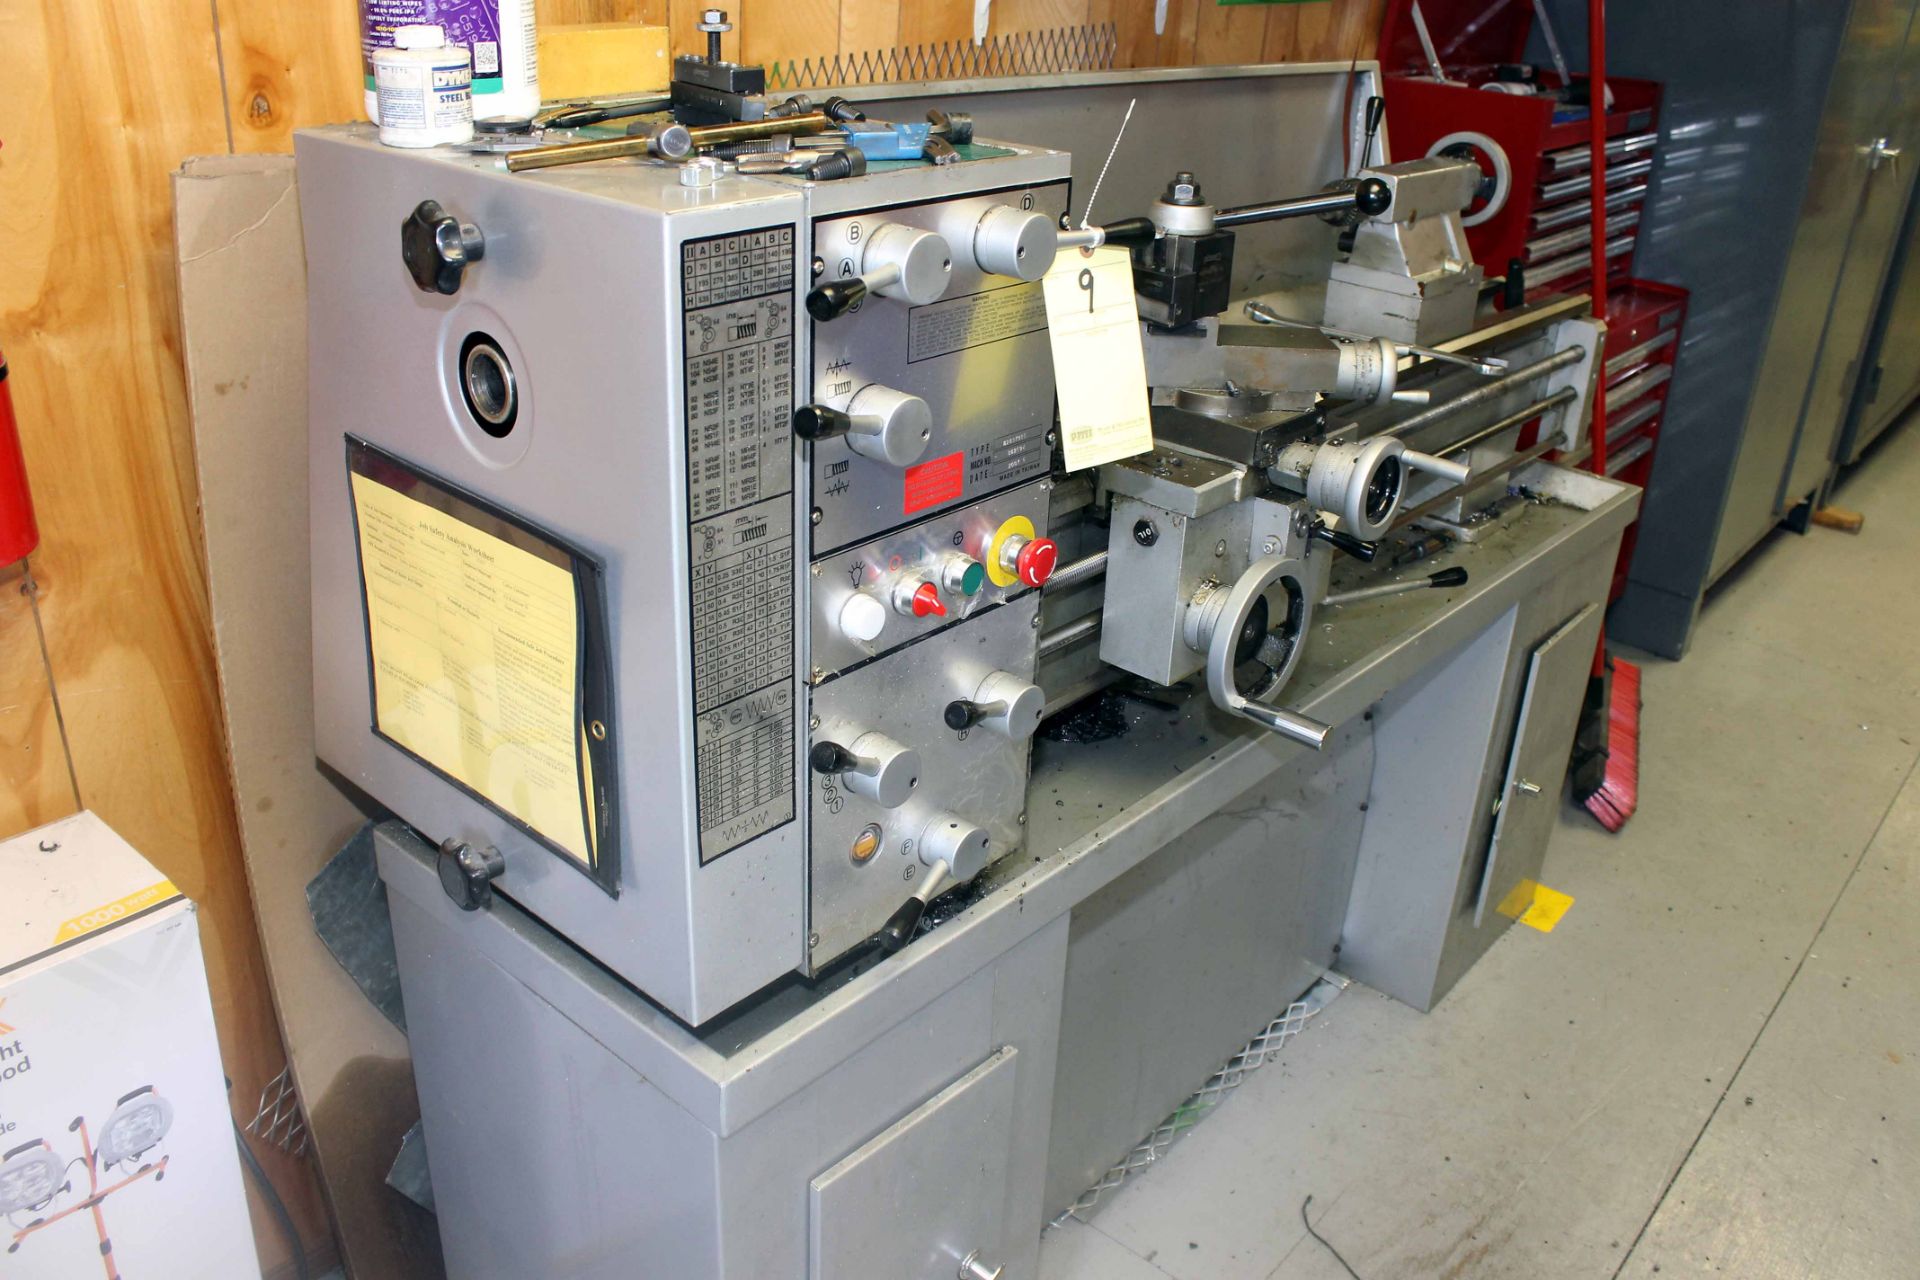 ENGINE LATHE, VECTRAX 14" X 40" MDL. 82837915, new 2007, spds: 70-1500 RPM, geared head, English/ - Image 2 of 4